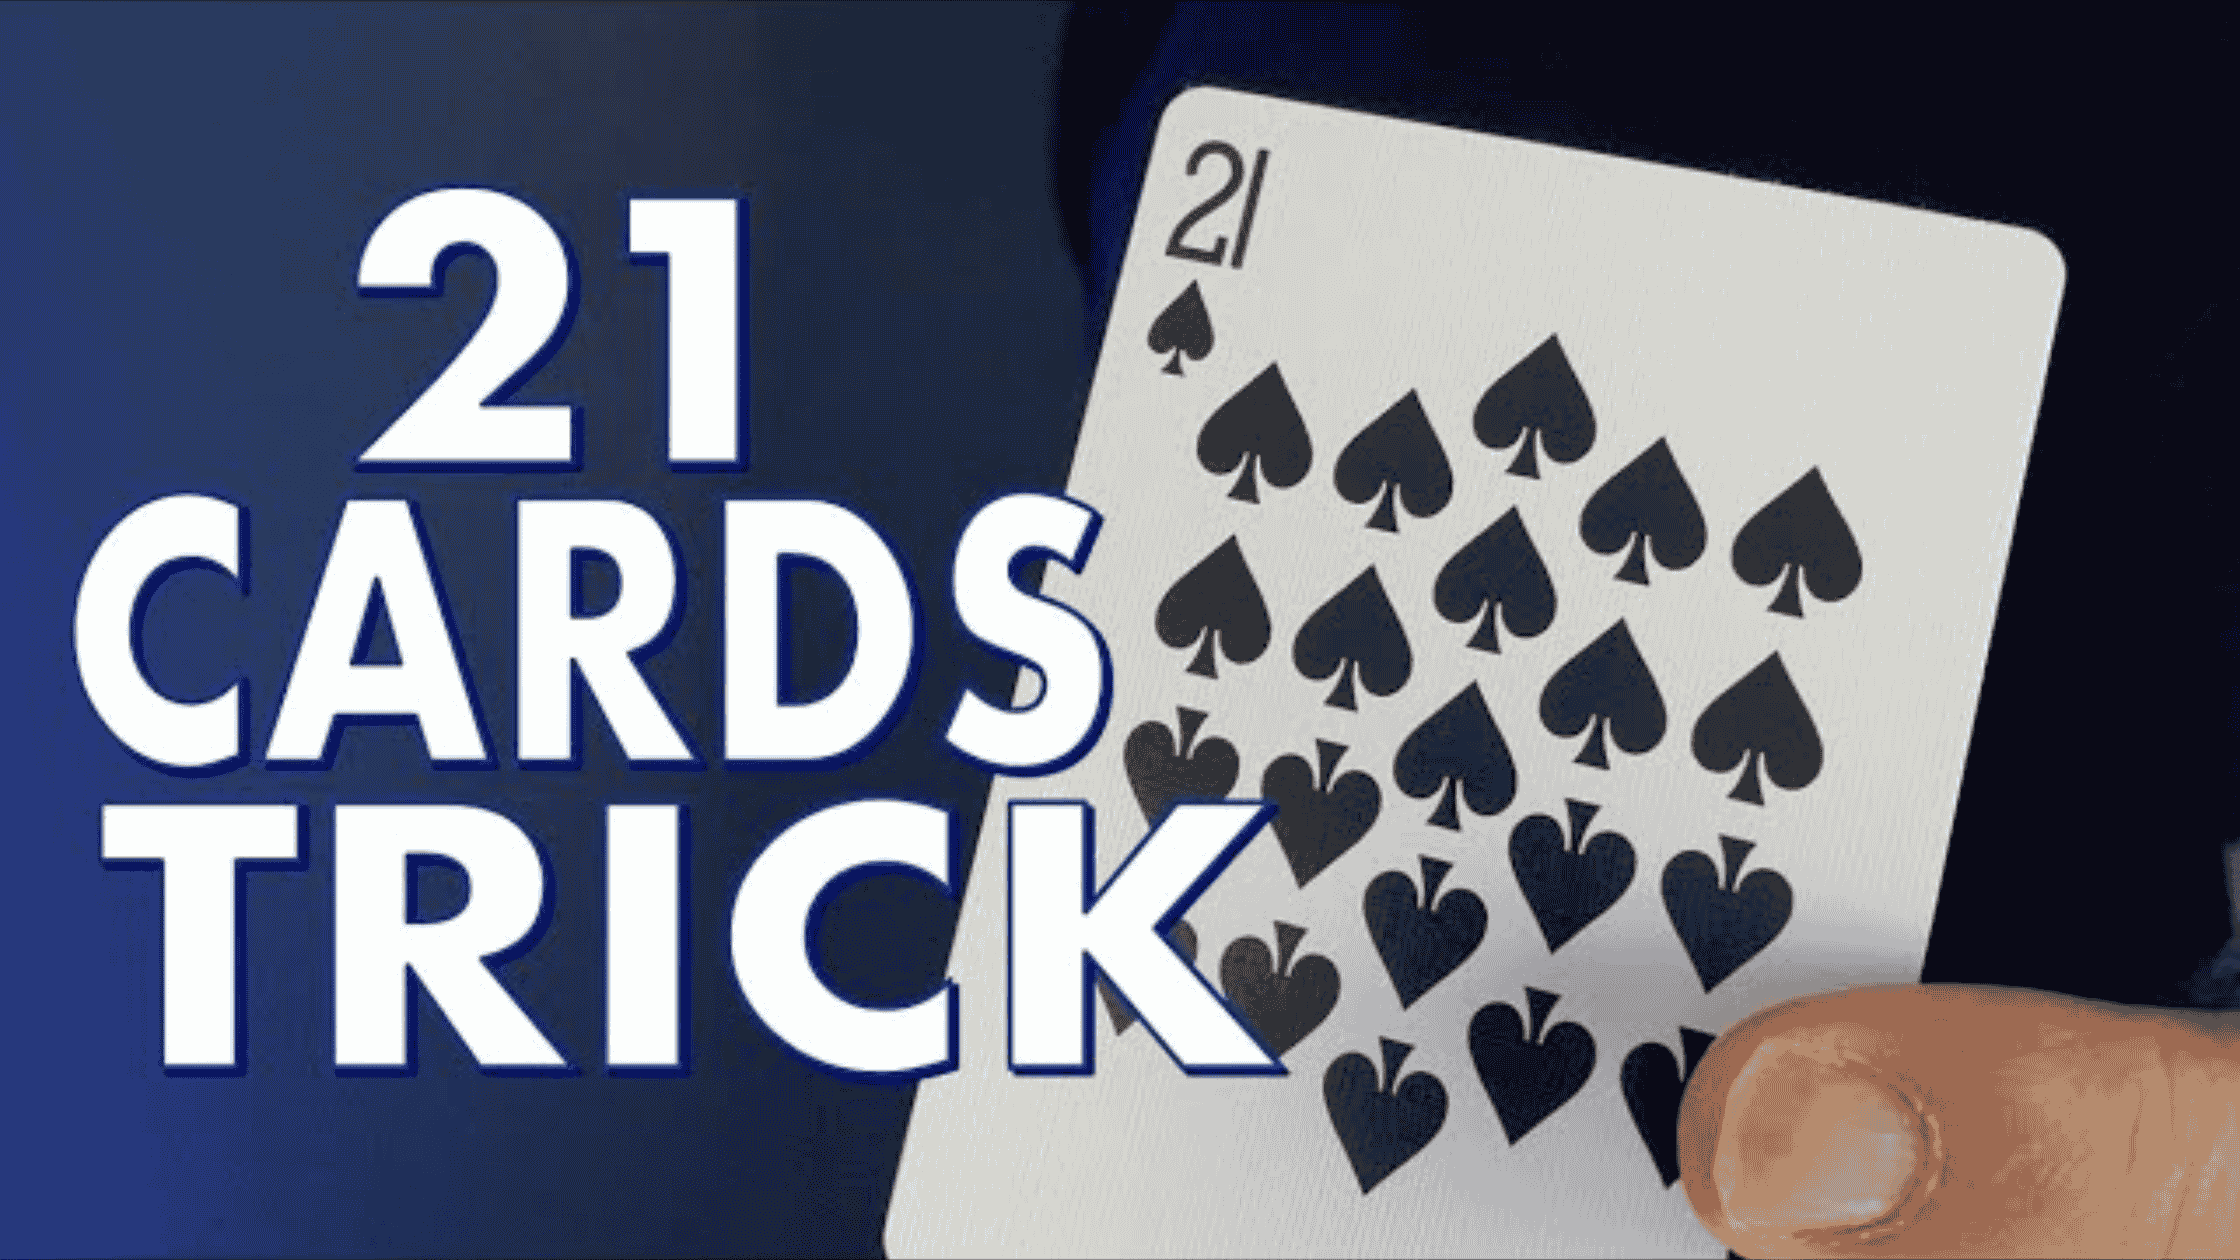 Essential Tips for Perfecting the 21 Card Trick